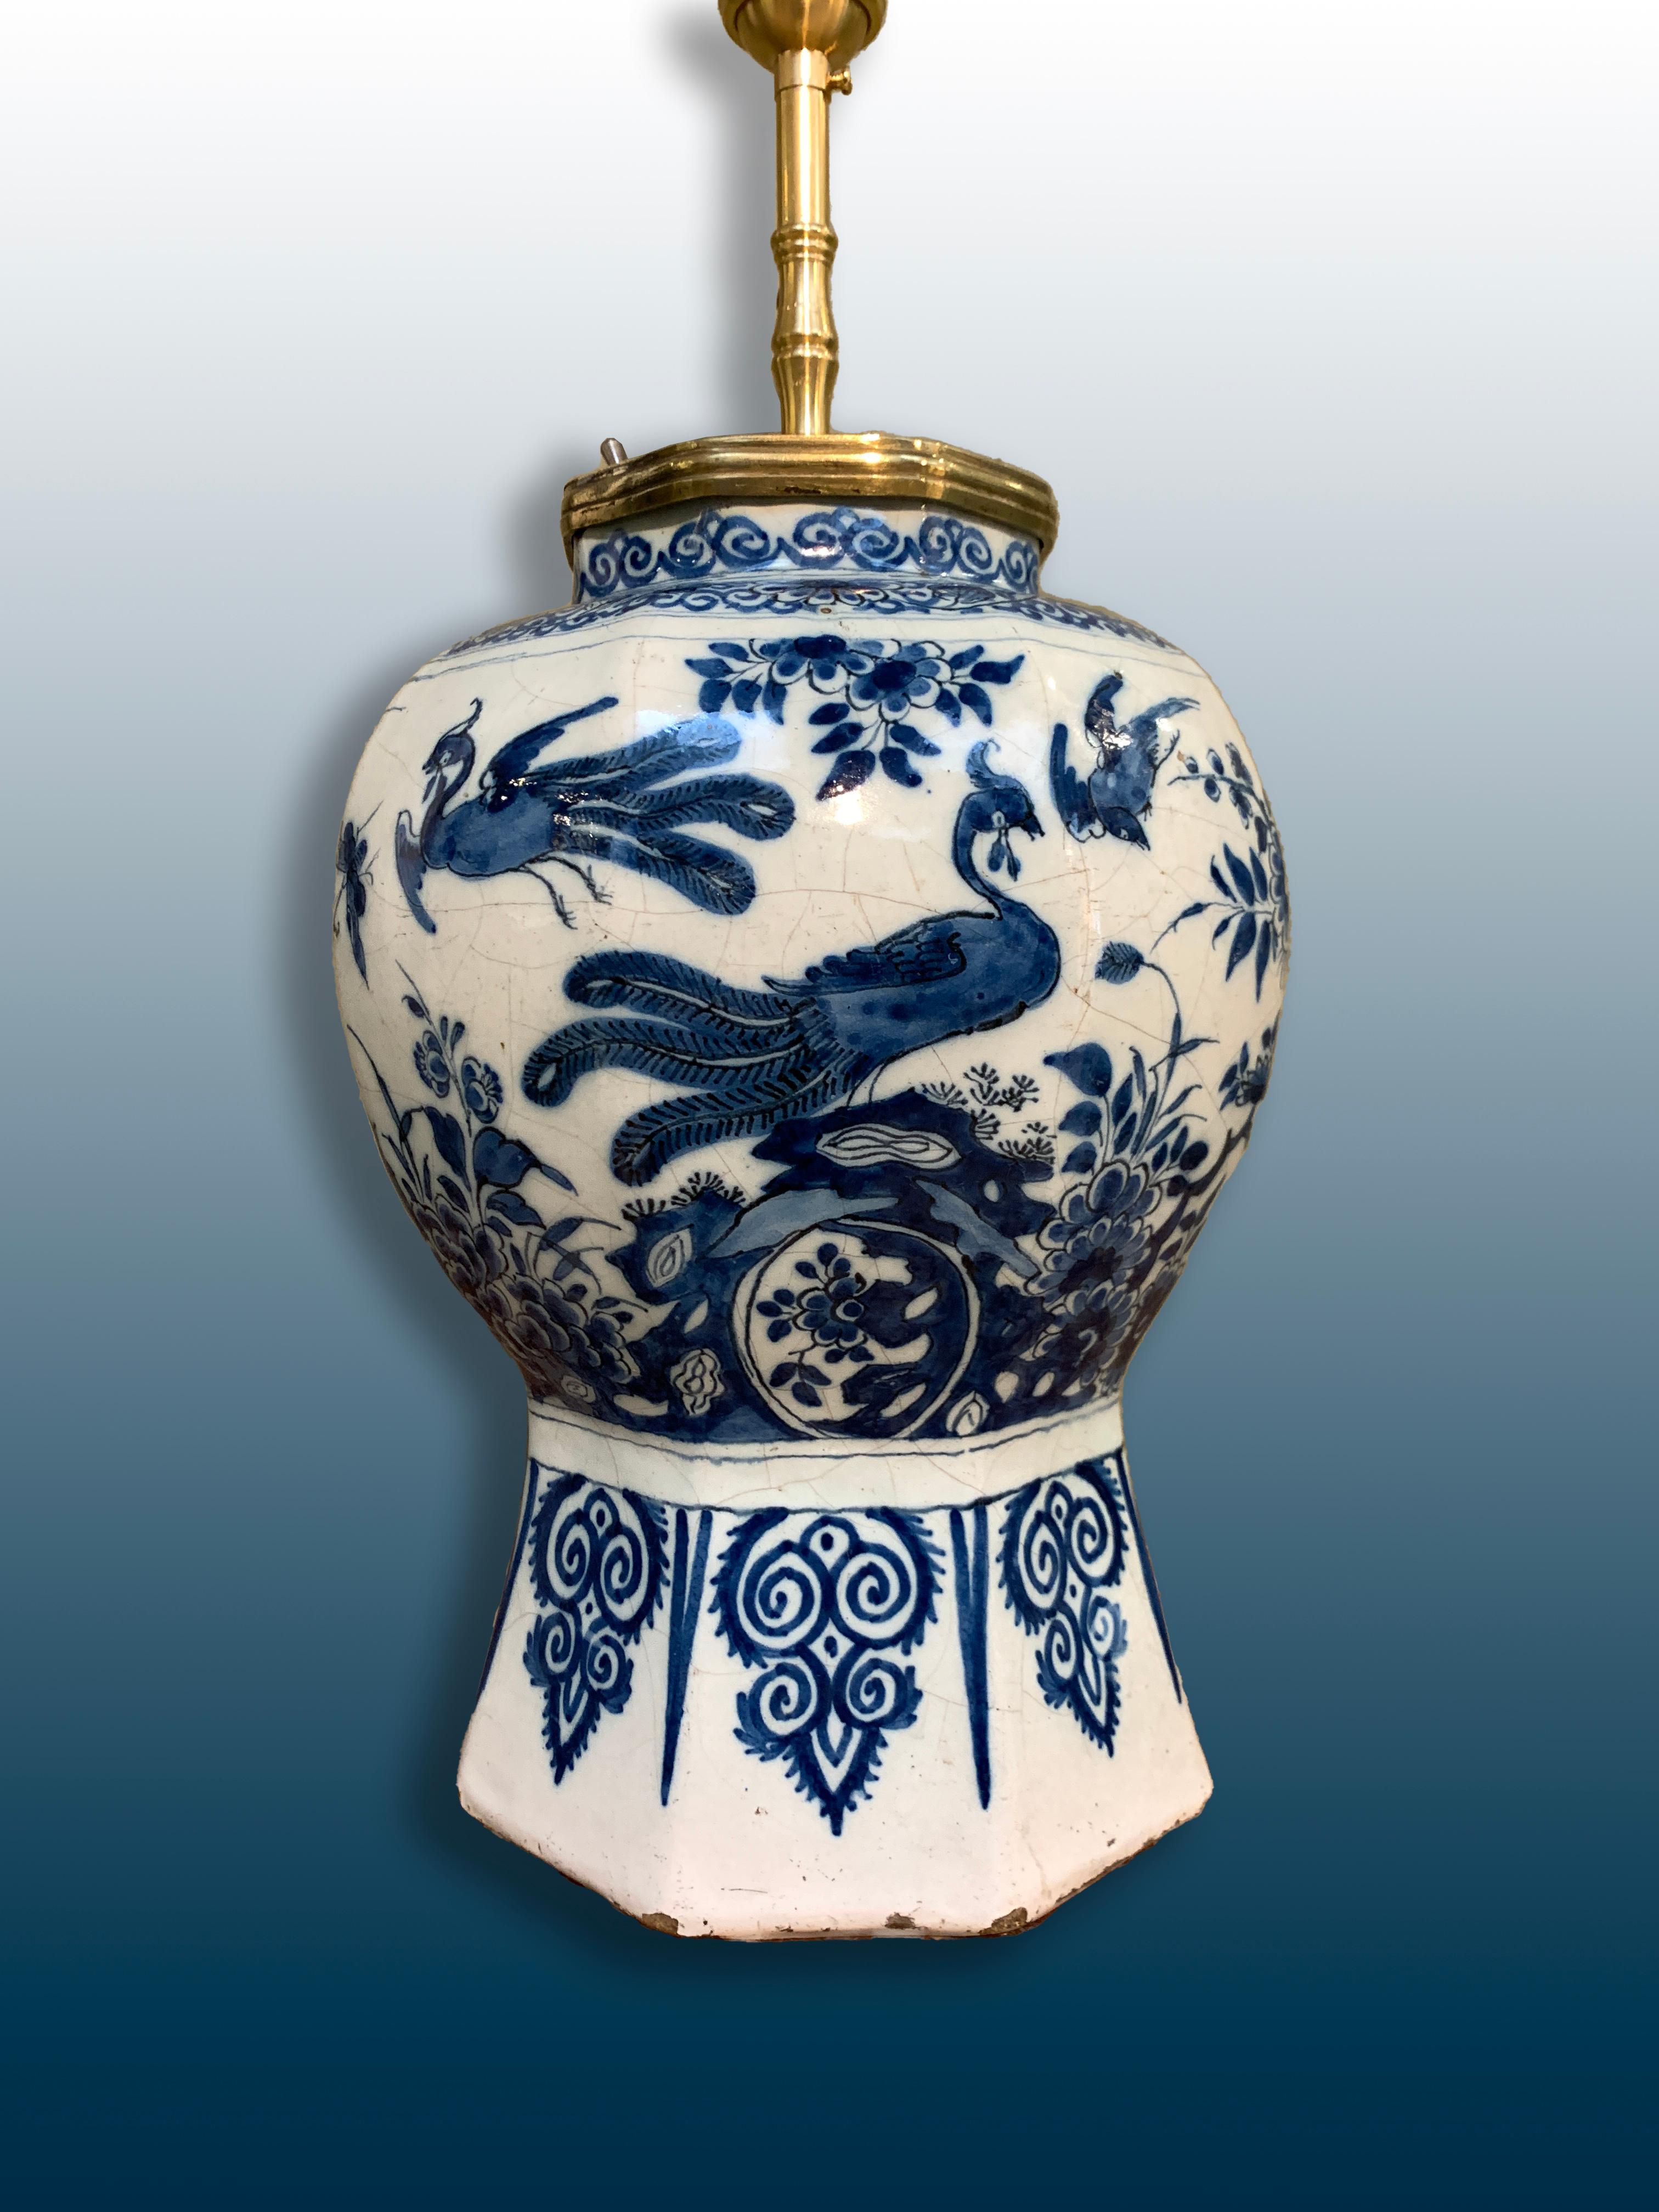 Chinoiserie Early 18th Century Dutch Delft Vase Converted into a Lamp For Sale